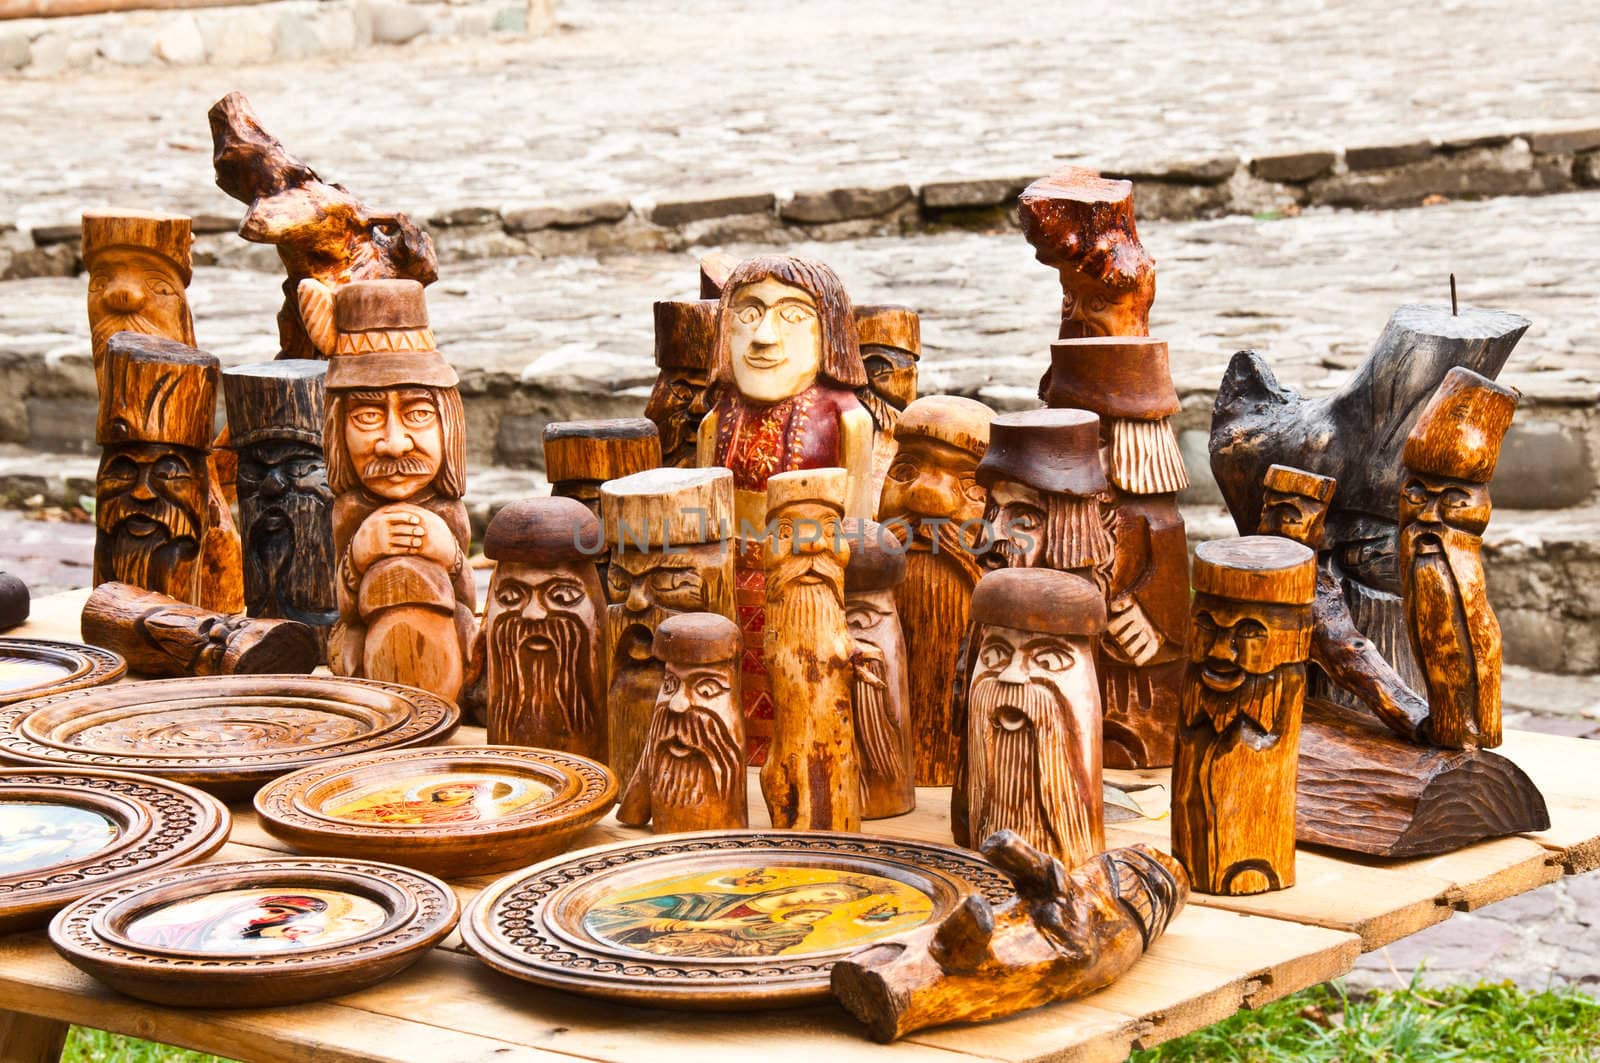 A small wooden sculptures carved by local craftsmen in the Carpathians